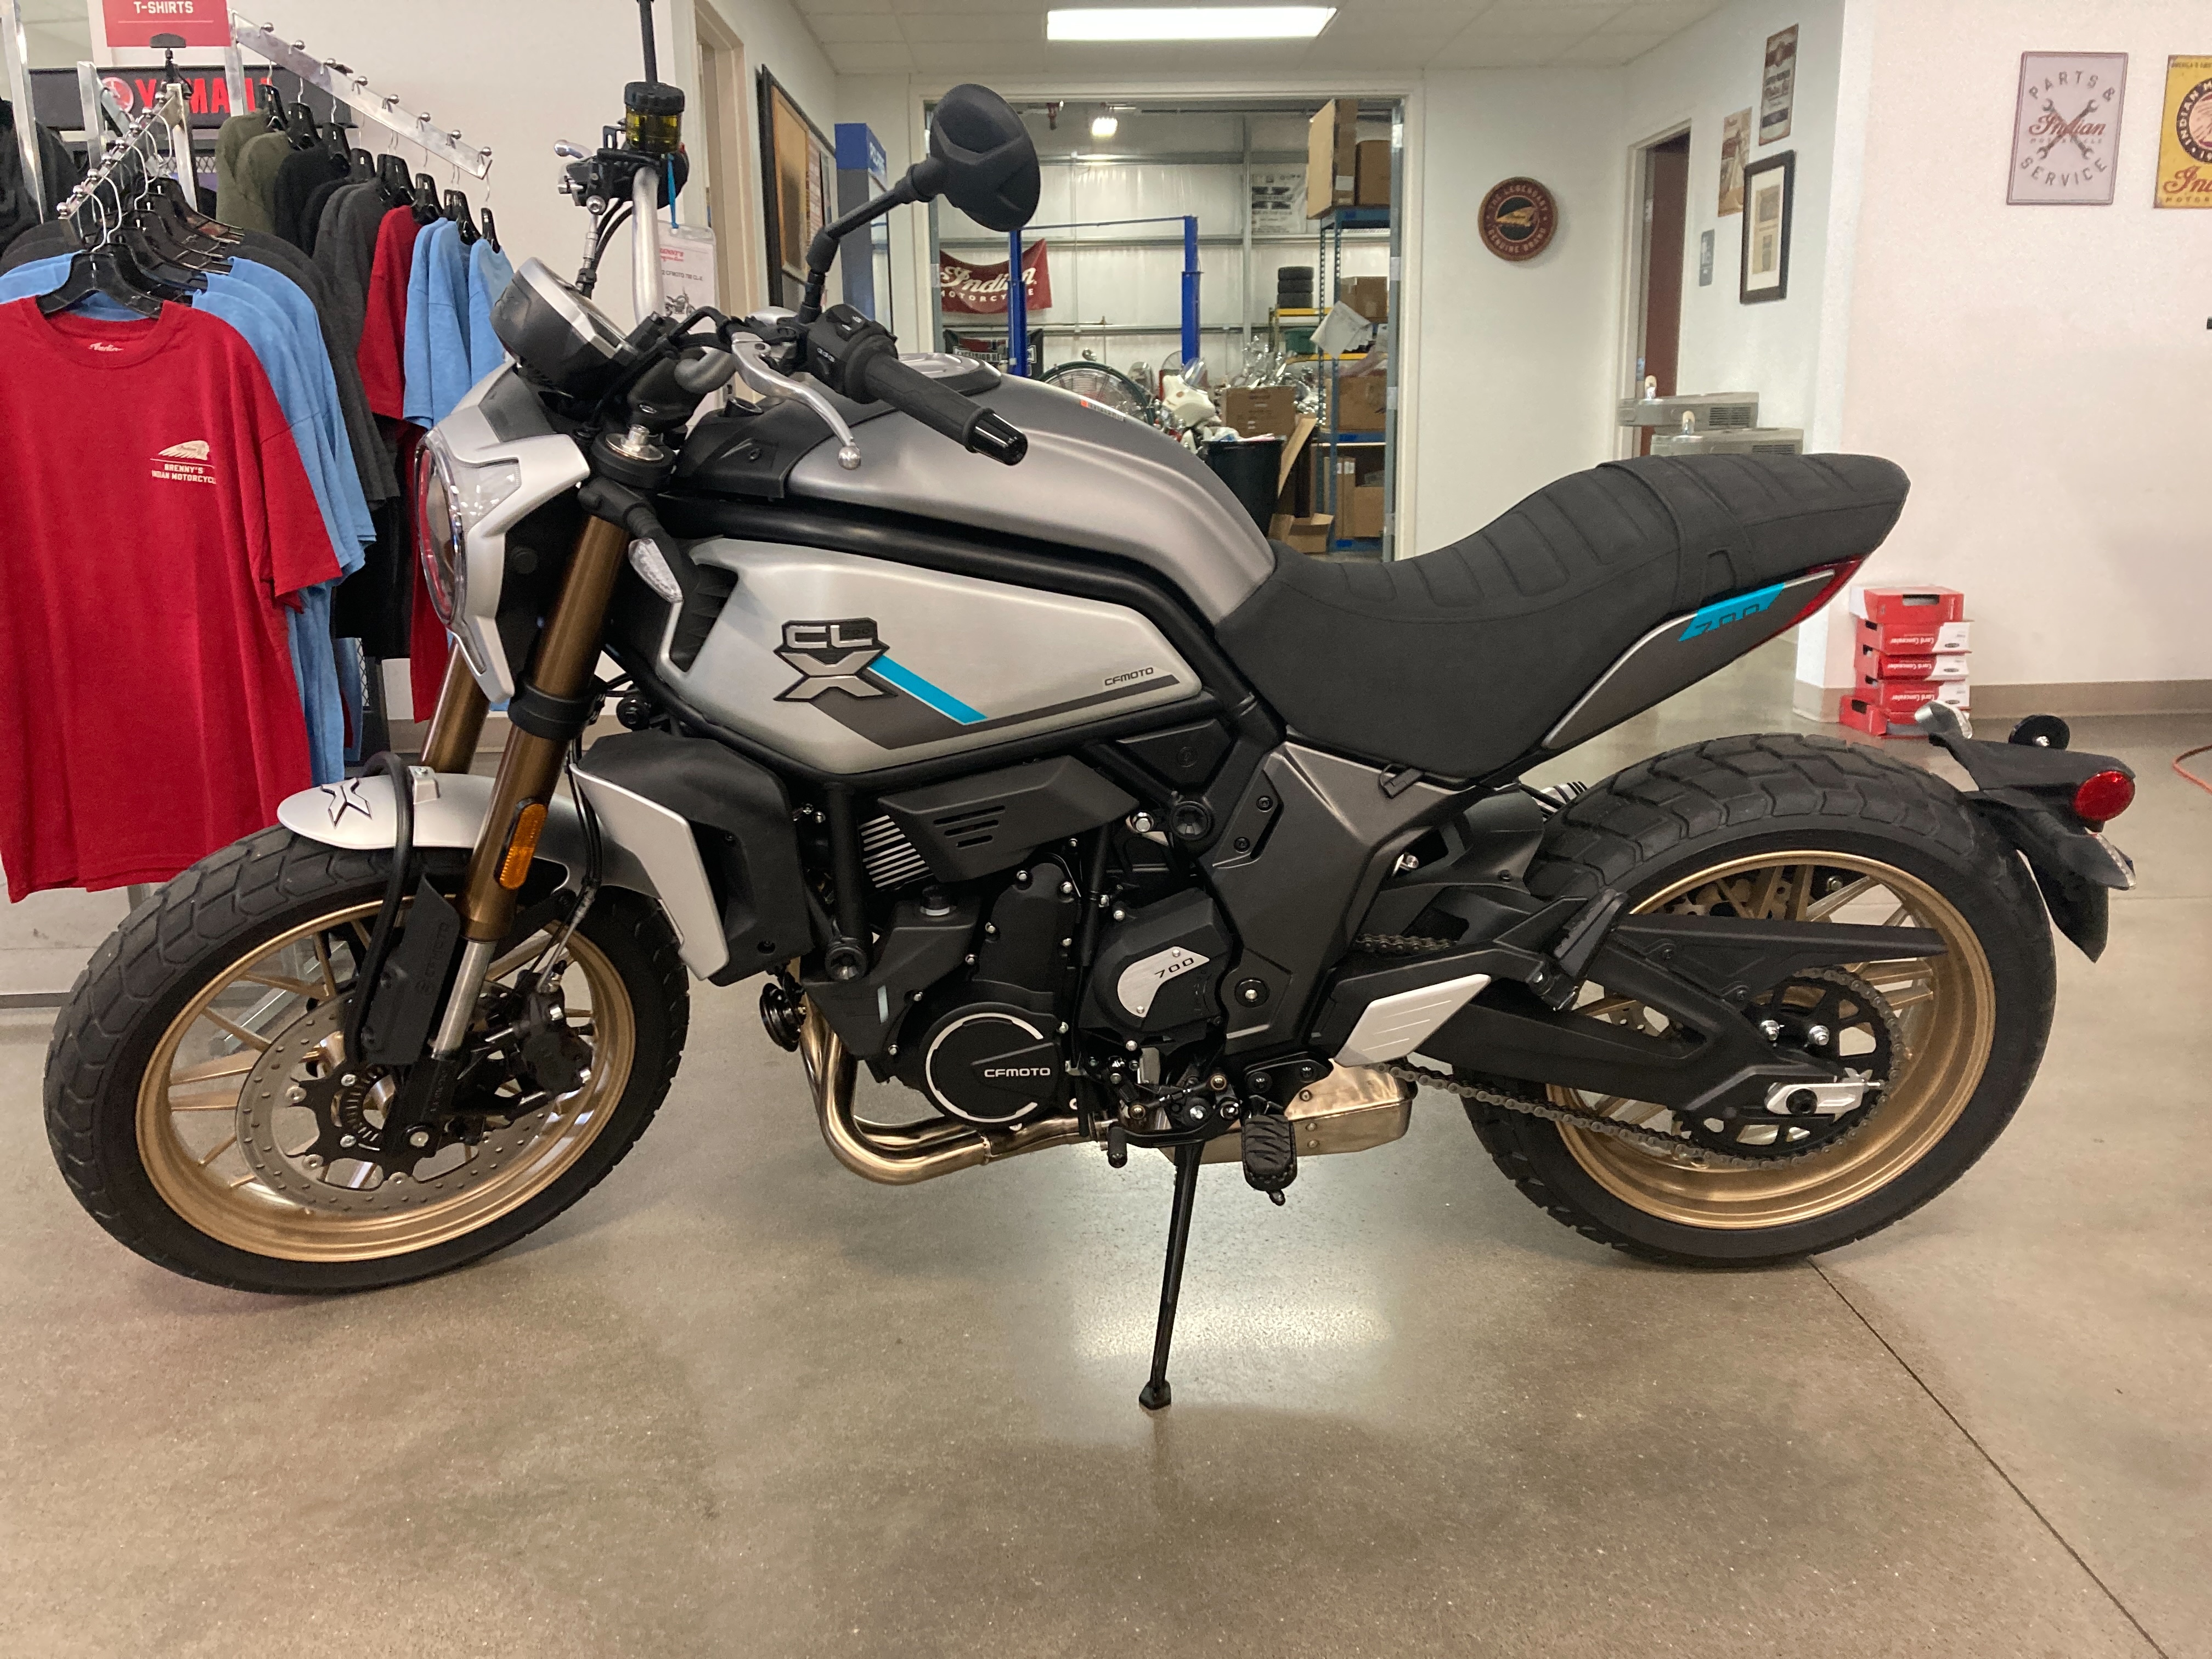 2022 CFMOTO 700 CL-X at Brenny's Motorcycle Clinic, Bettendorf, IA 52722